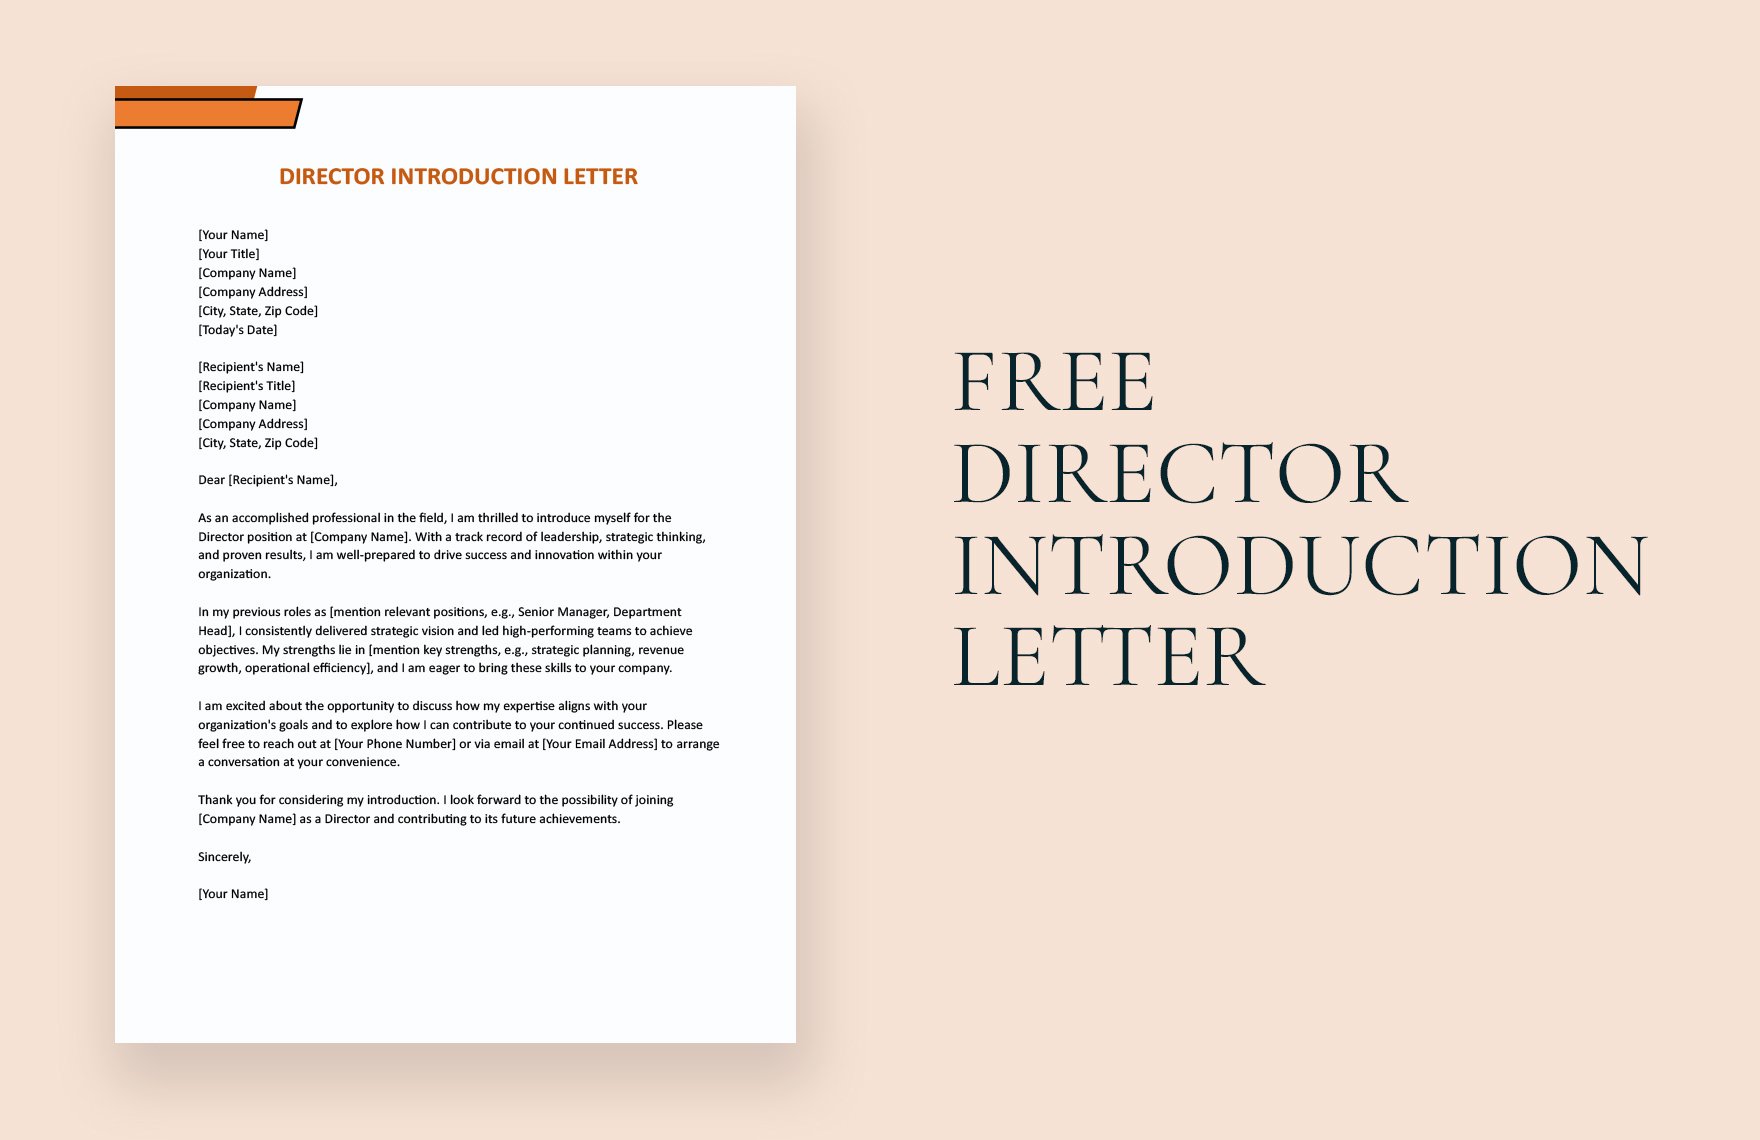 Free Director Introduction Letter